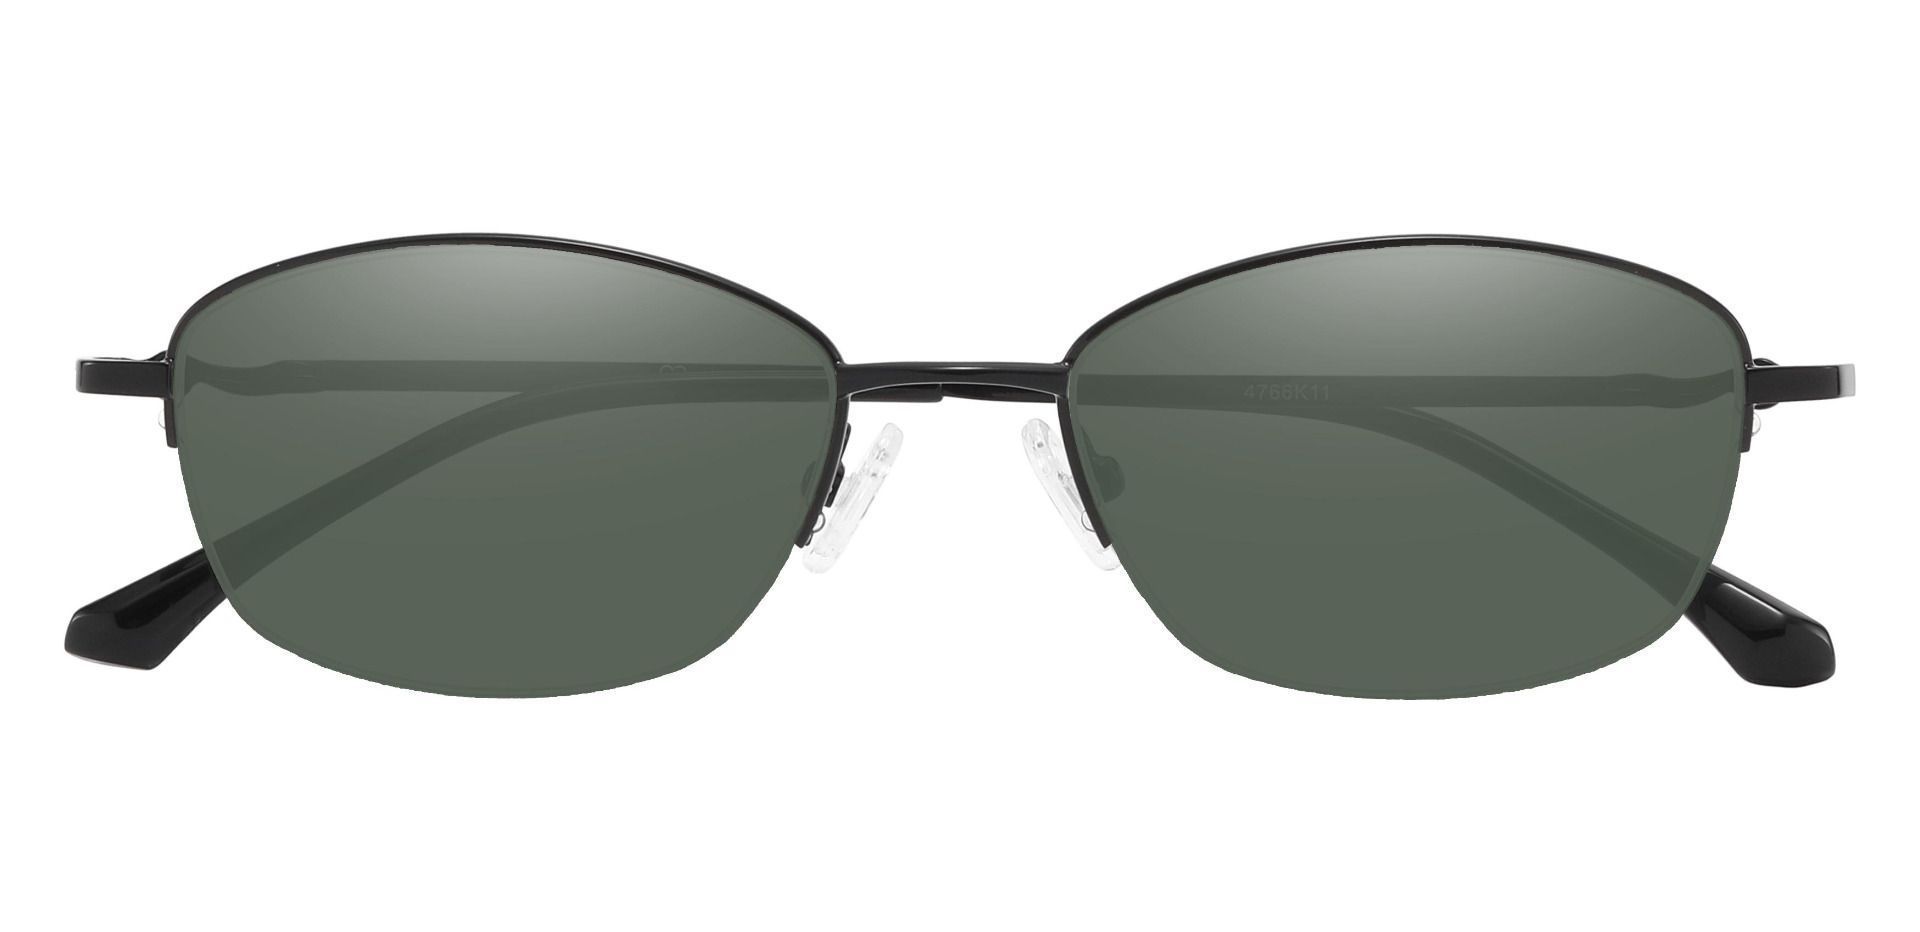 Beulah Oval Non-Rx Sunglasses - Black Frame With Green Lenses